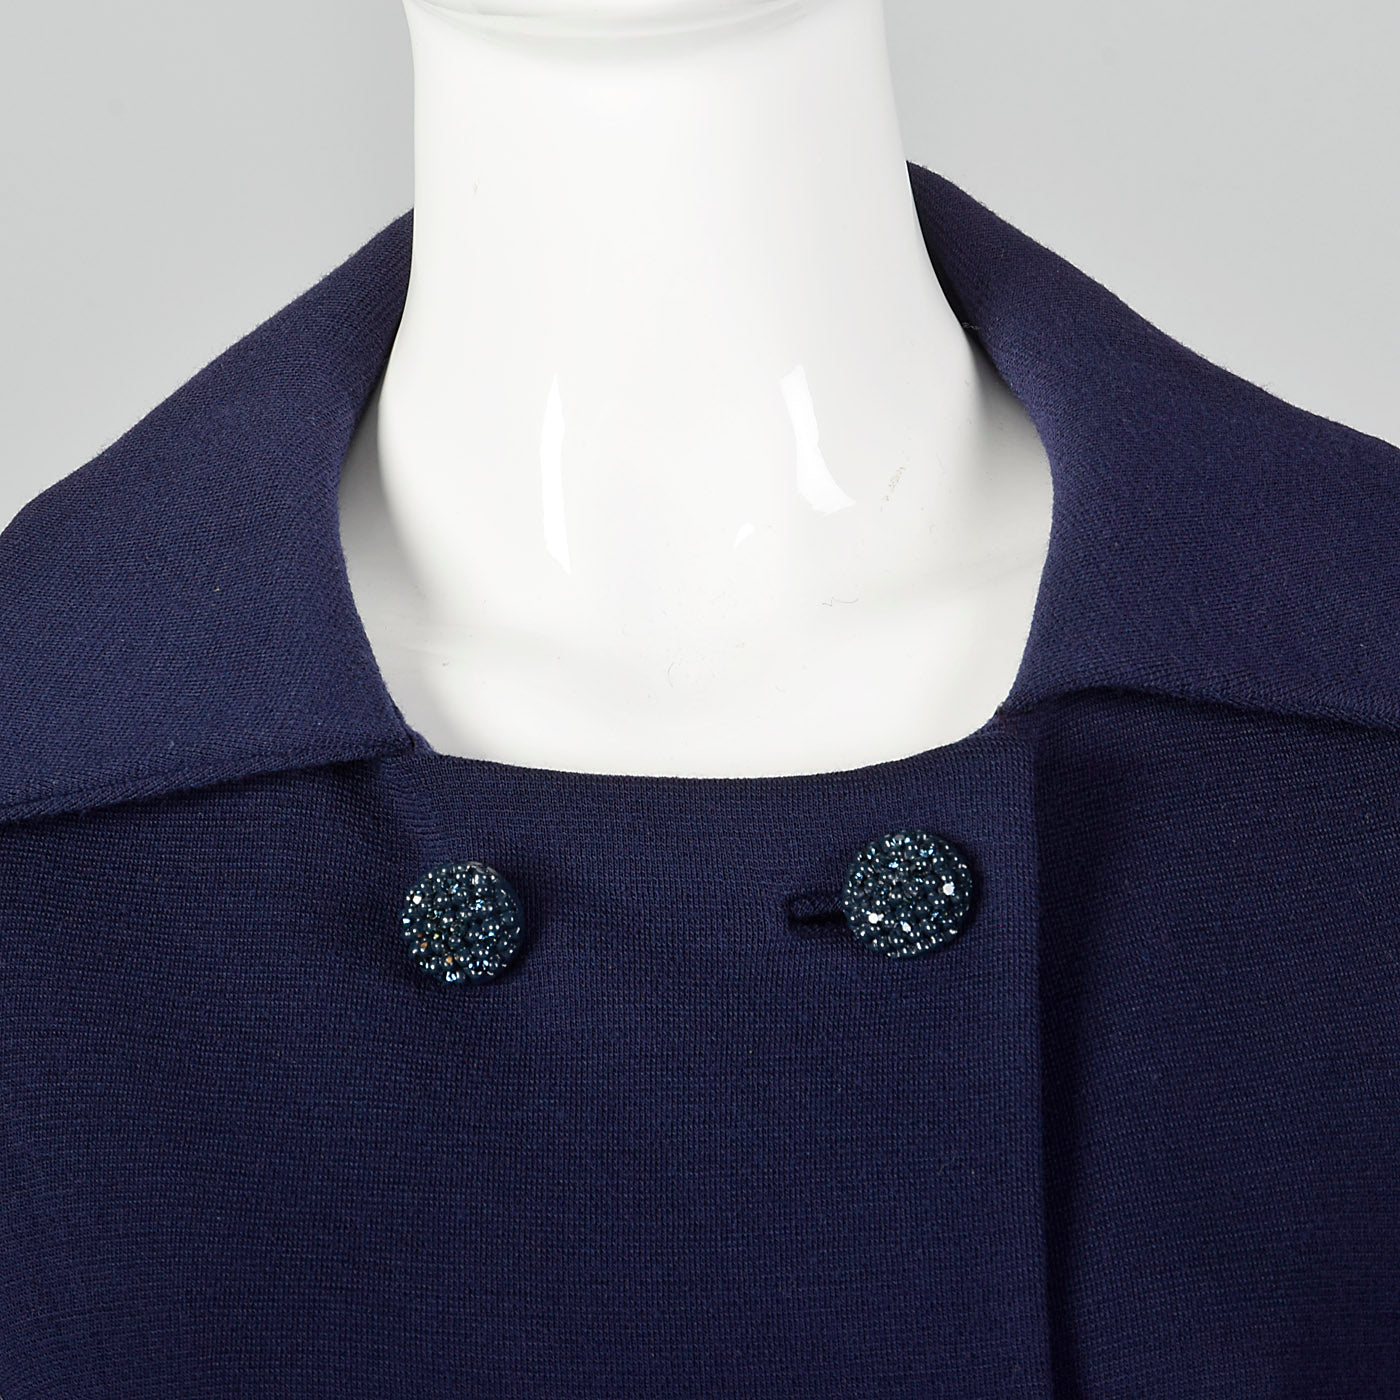 1960s Navy Wool Cardigan Coat with Belted Back